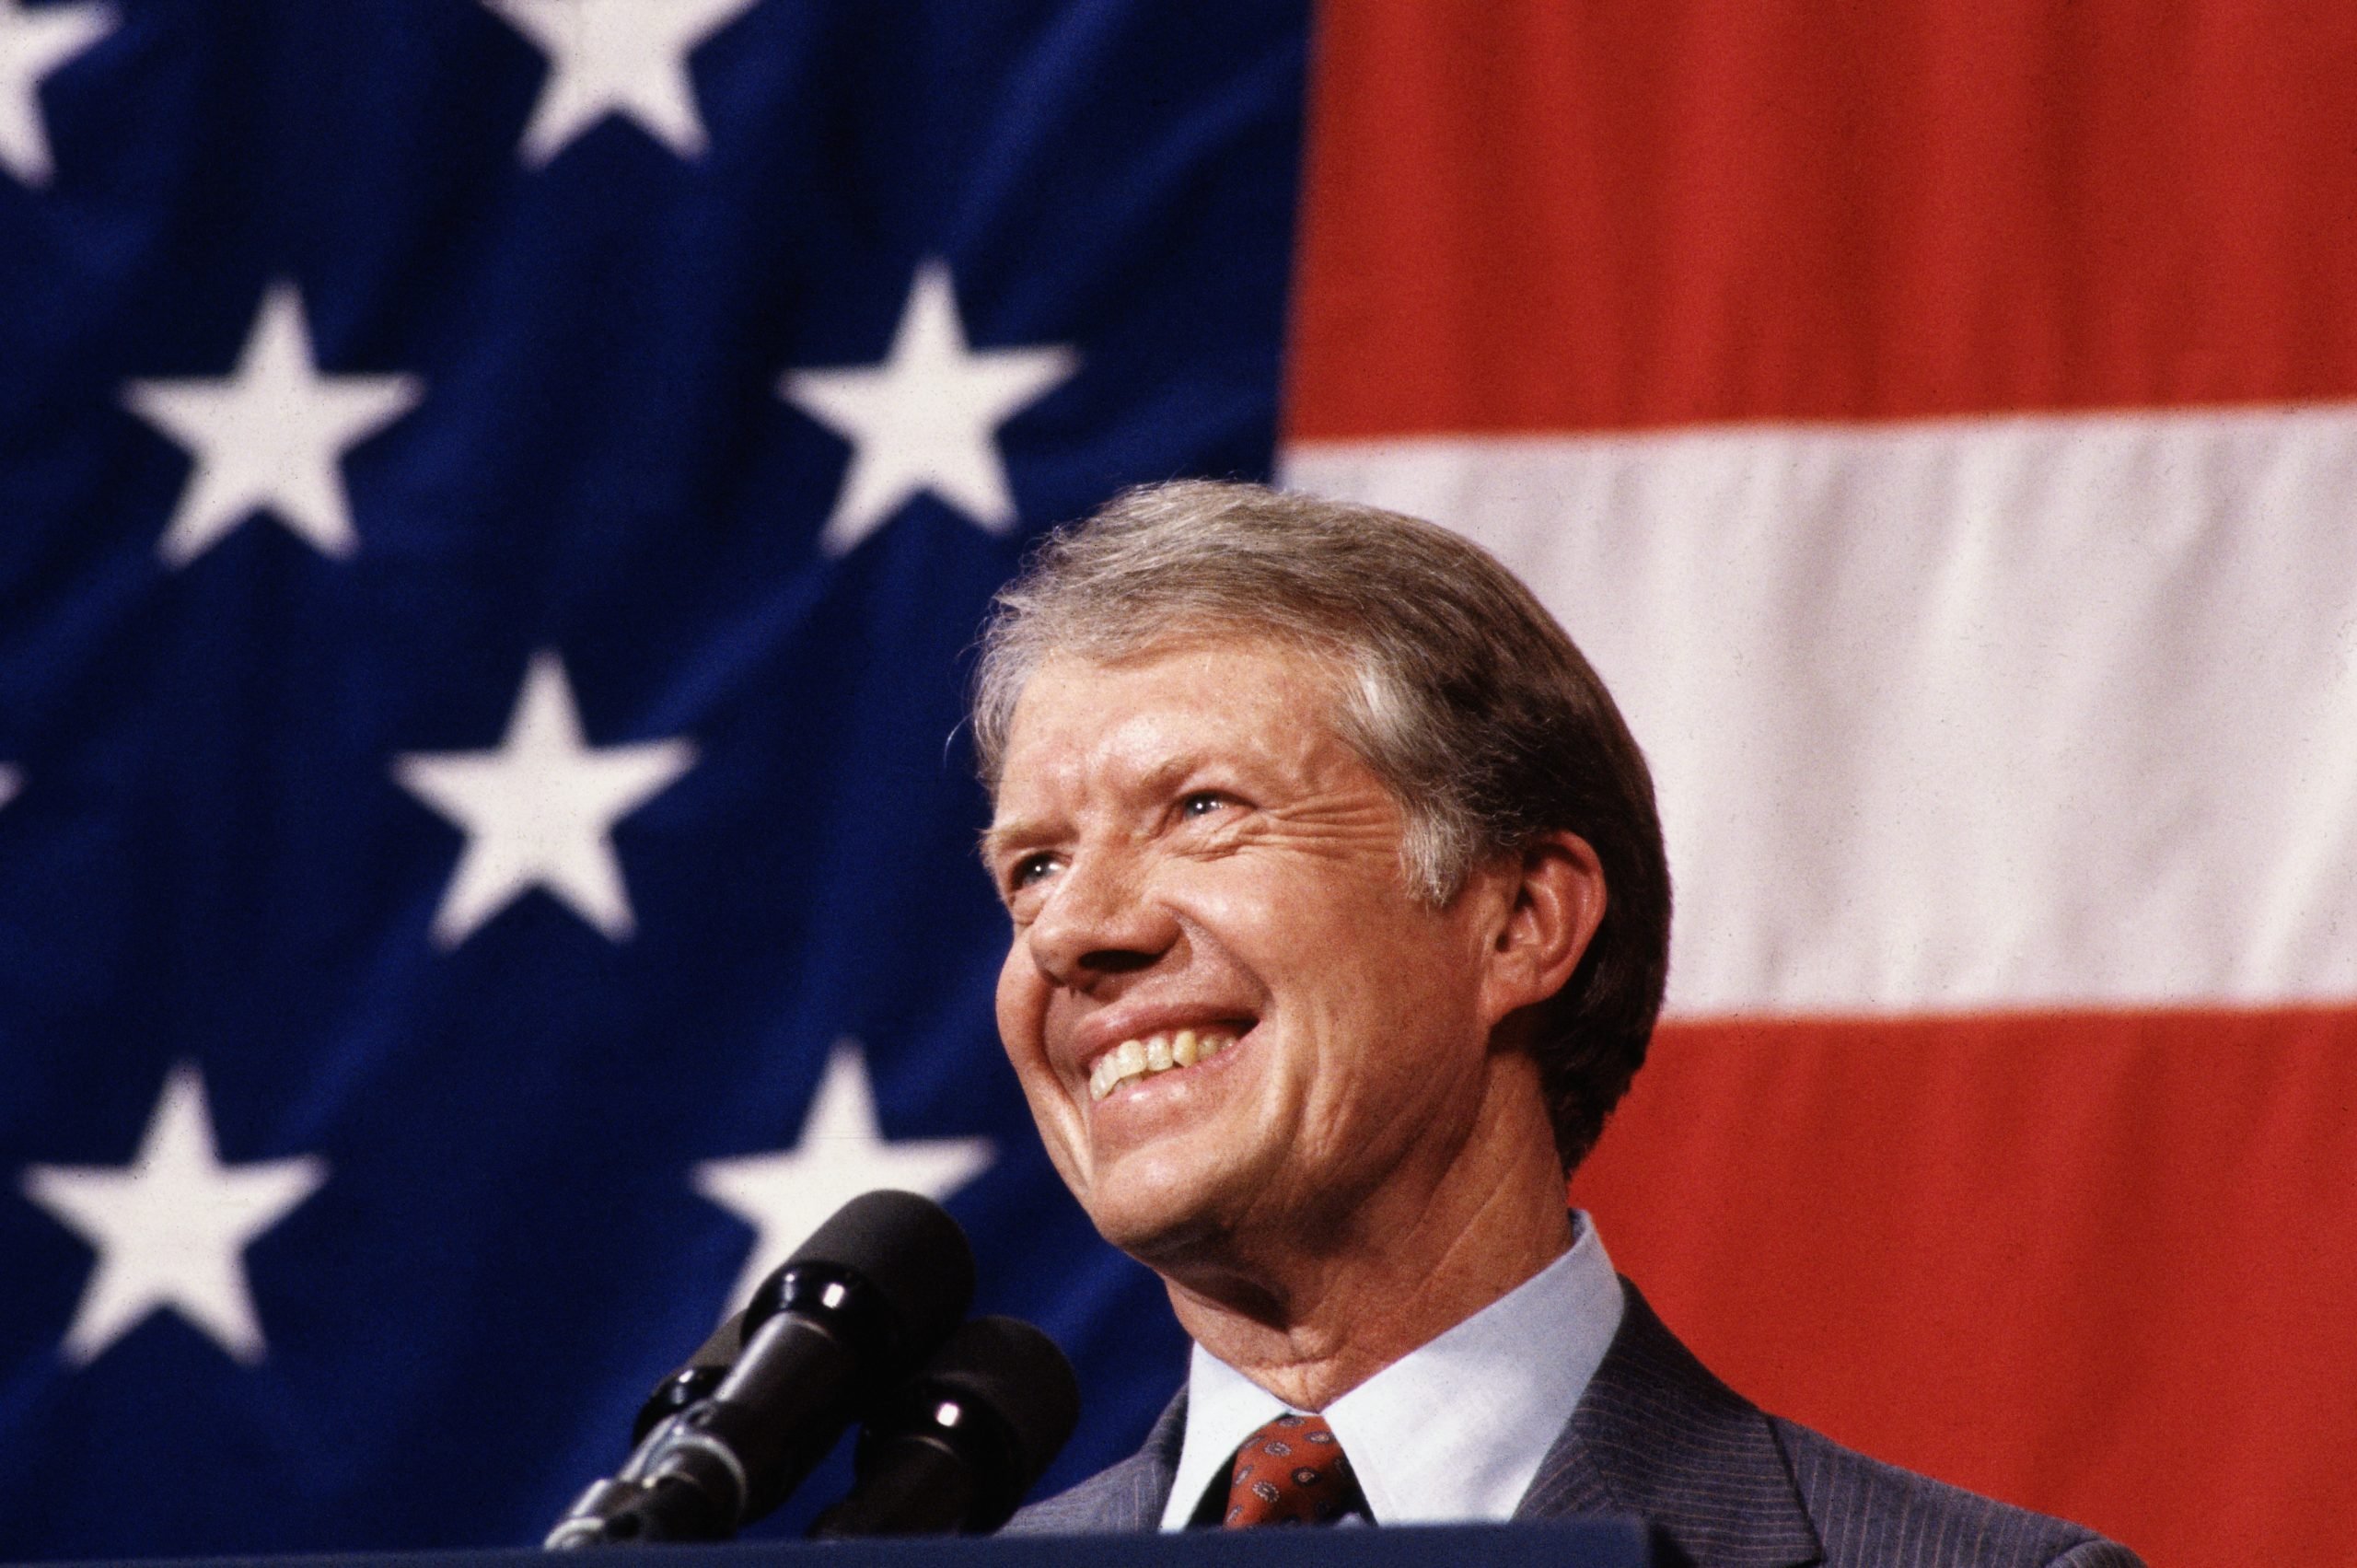 President Jimmy Carter at Podium during a town meeting with an American Flag Background